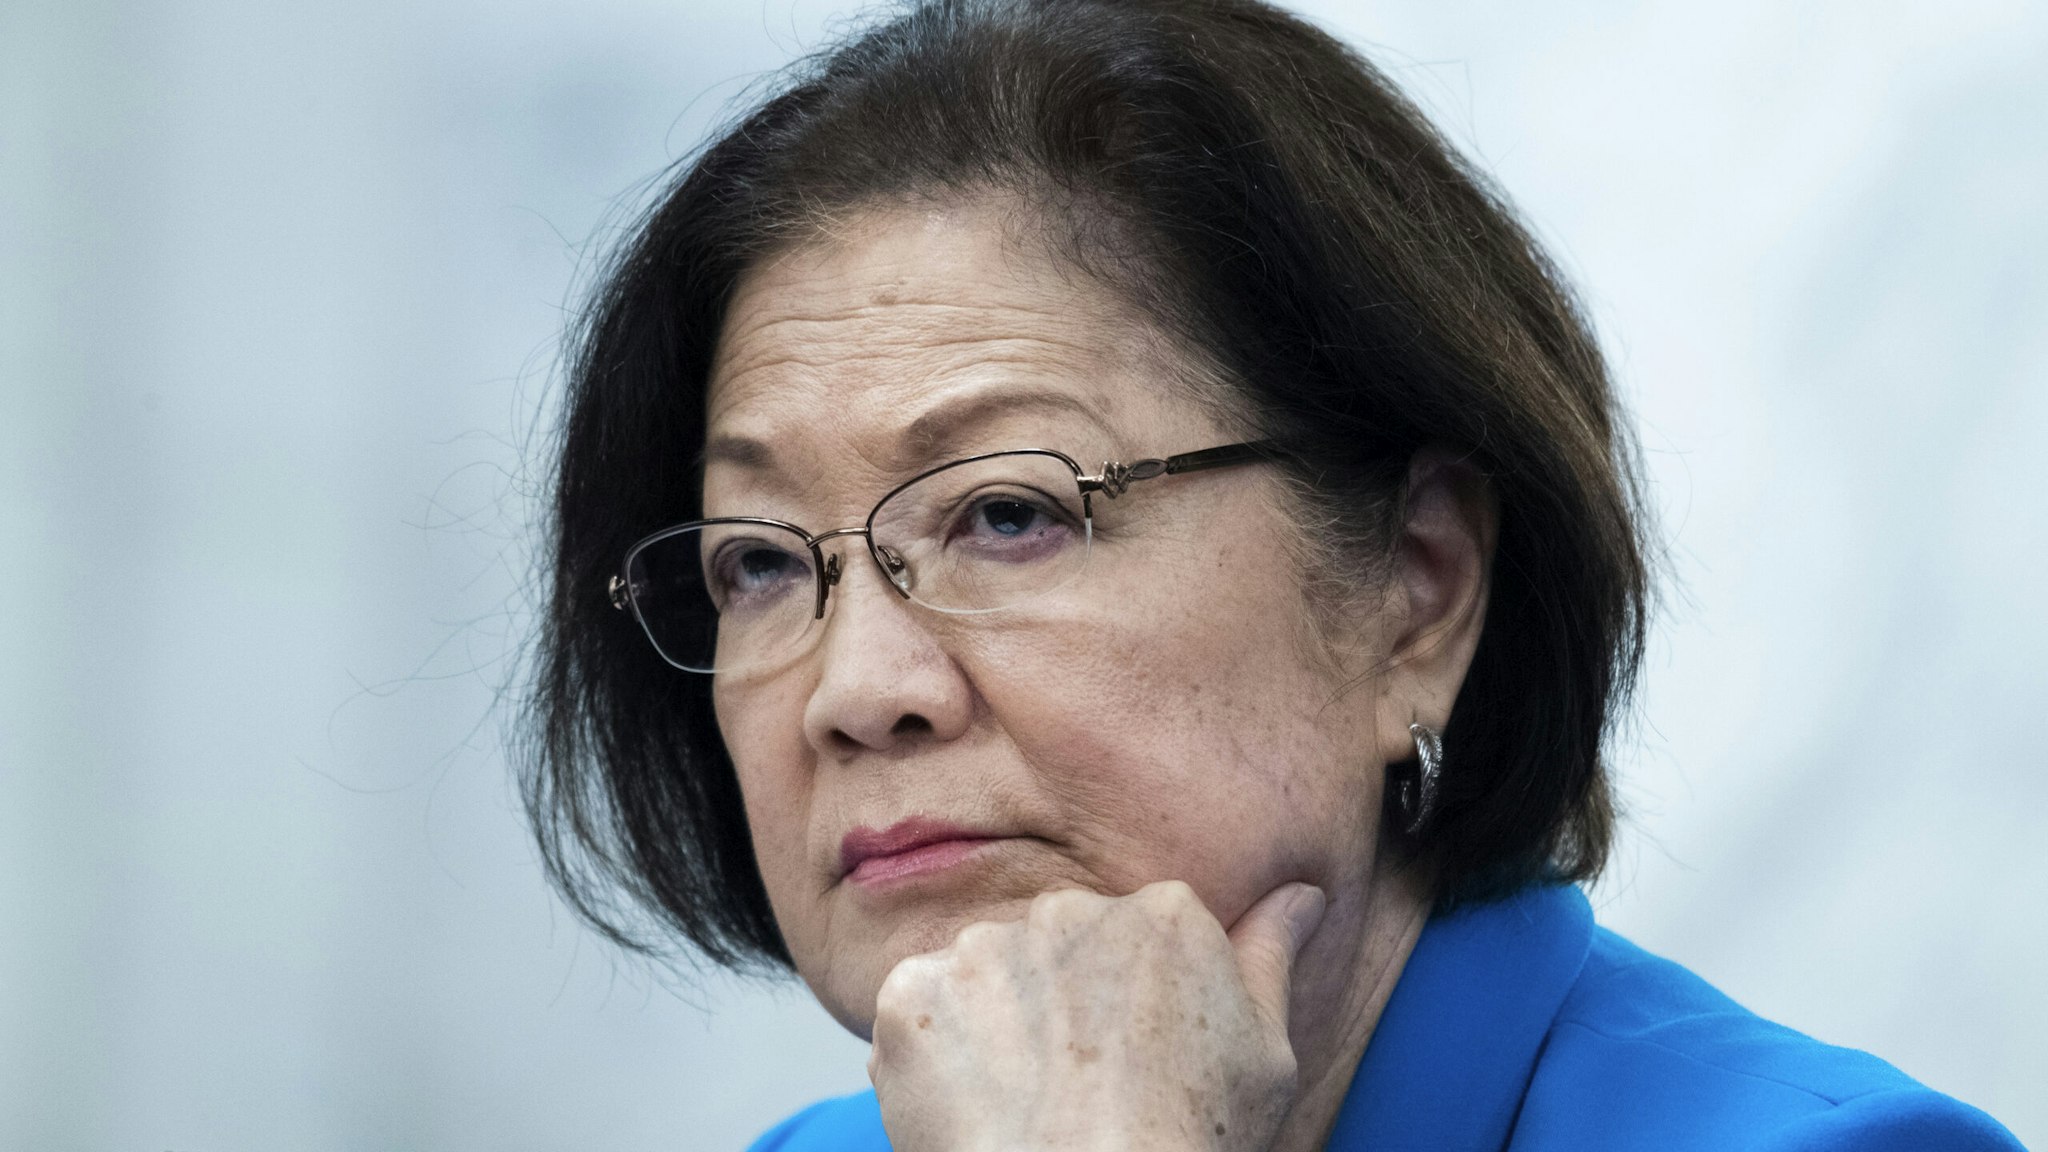 UNITED STATES - JULY 30: Sen. Mazie Hirono, D-Hawaii, attends the Senate Judiciary Committee markup on the Civil Justice for Victims of COVID Act, and judicial nominations in Russell Building on Thursday, July 30, 2020.